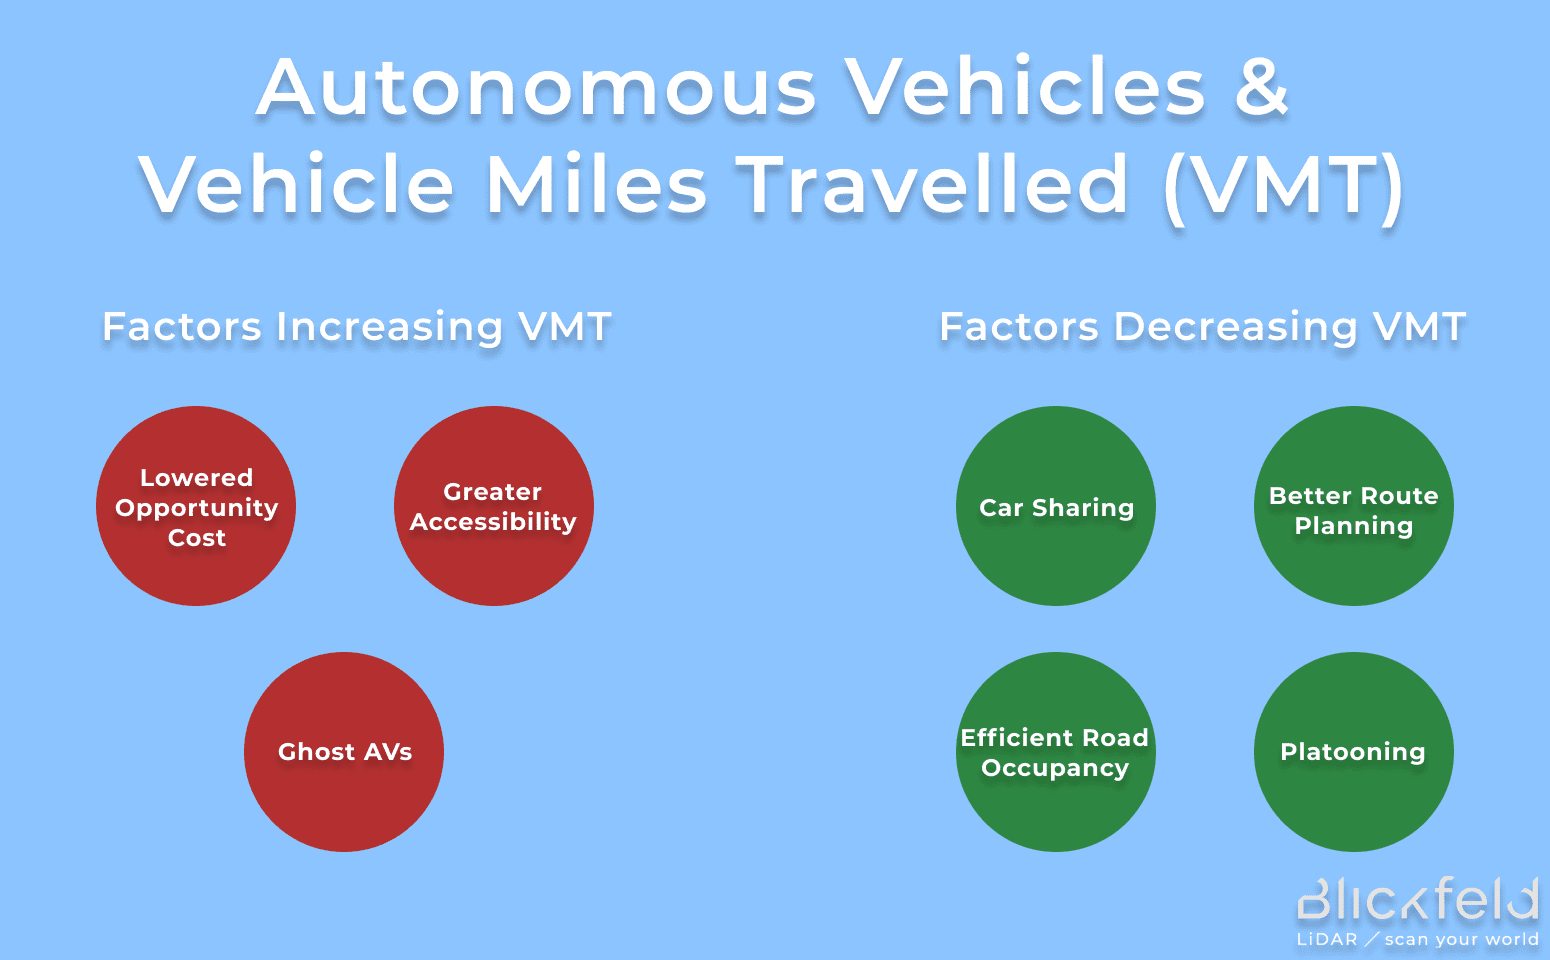 There are multiple factors affecting total miles traveled in AVs